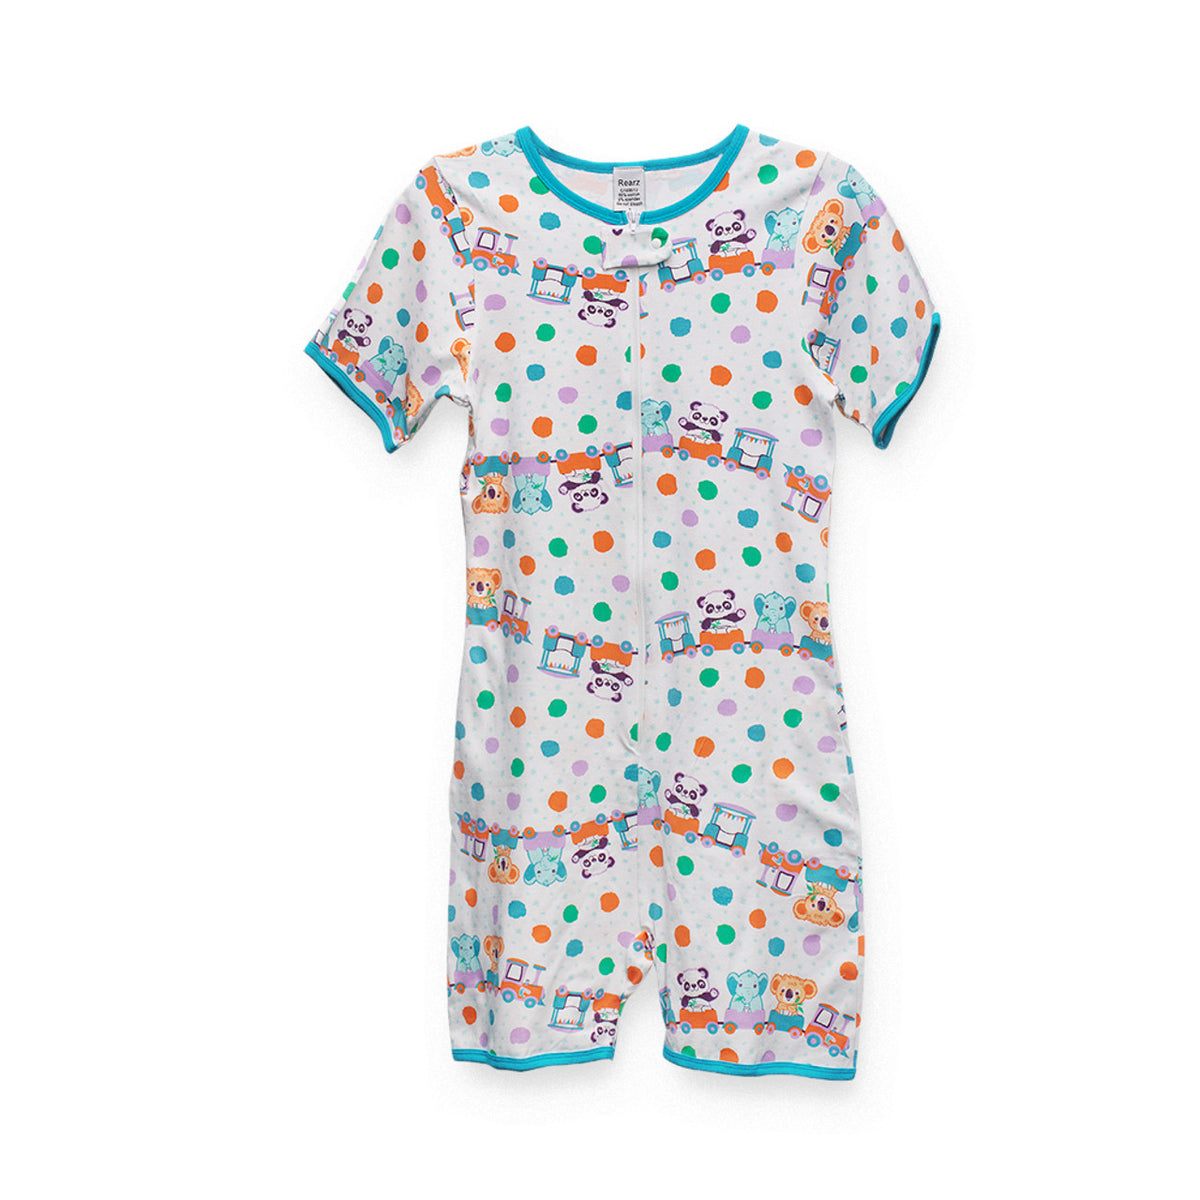 Rearz Critter Caboose Playsuit – My Inner Baby